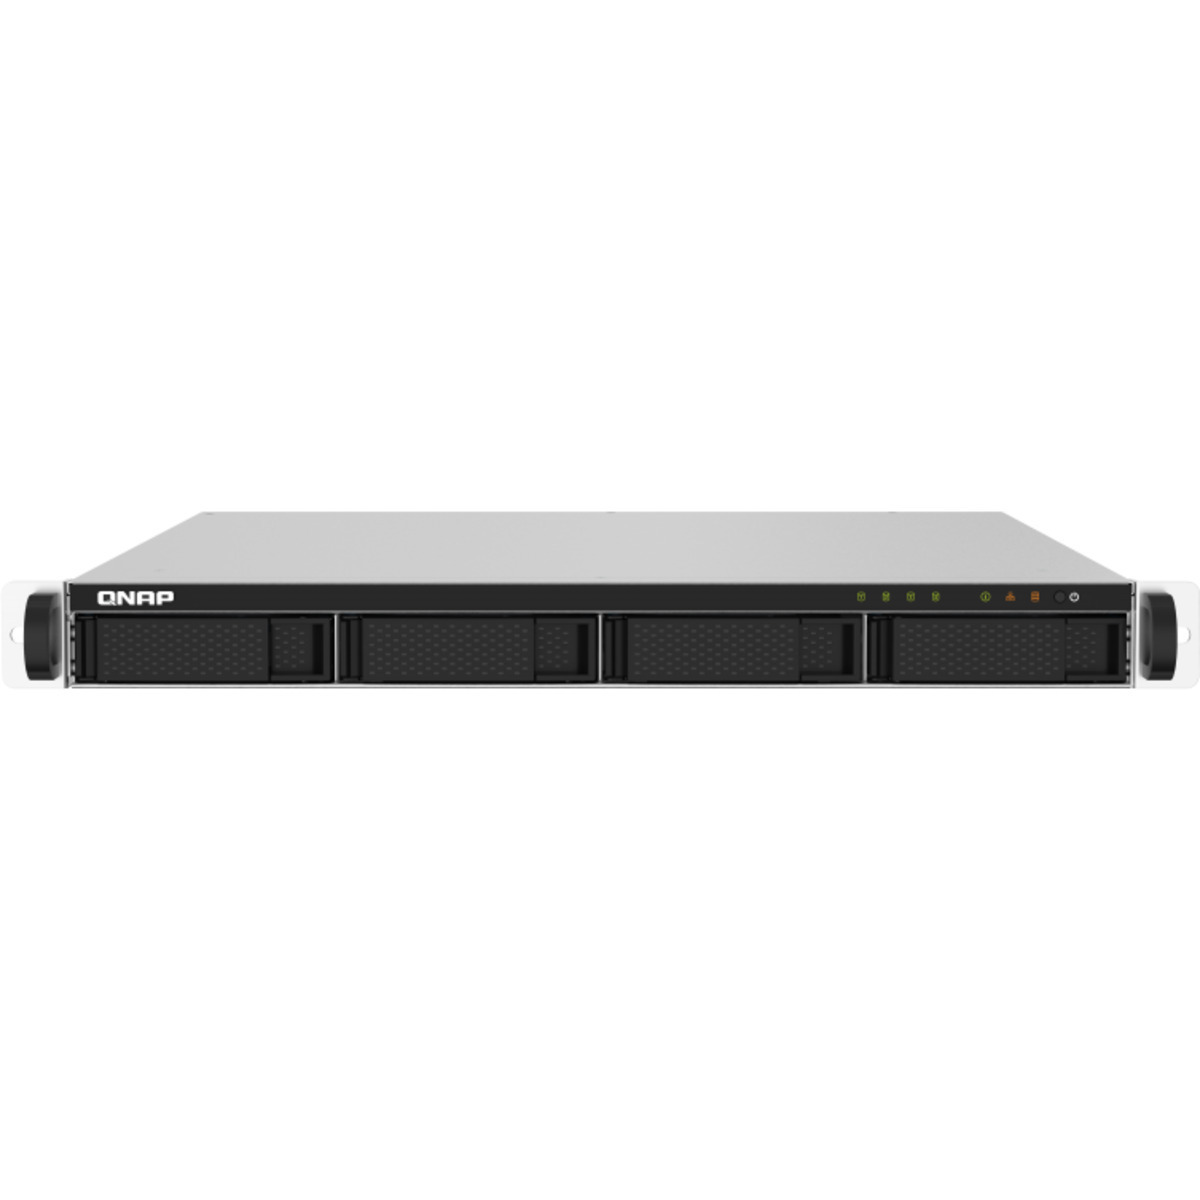 QNAP TS-432PXU 24tb 4-Bay RackMount Personal / Basic Home / Small Office NAS - Network Attached Storage Device 2x12tb Western Digital Red Plus WD120EFBX 3.5 7200rpm SATA 6Gb/s HDD NAS Class Drives Installed - Burn-In Tested - FREE RAM UPGRADE TS-432PXU